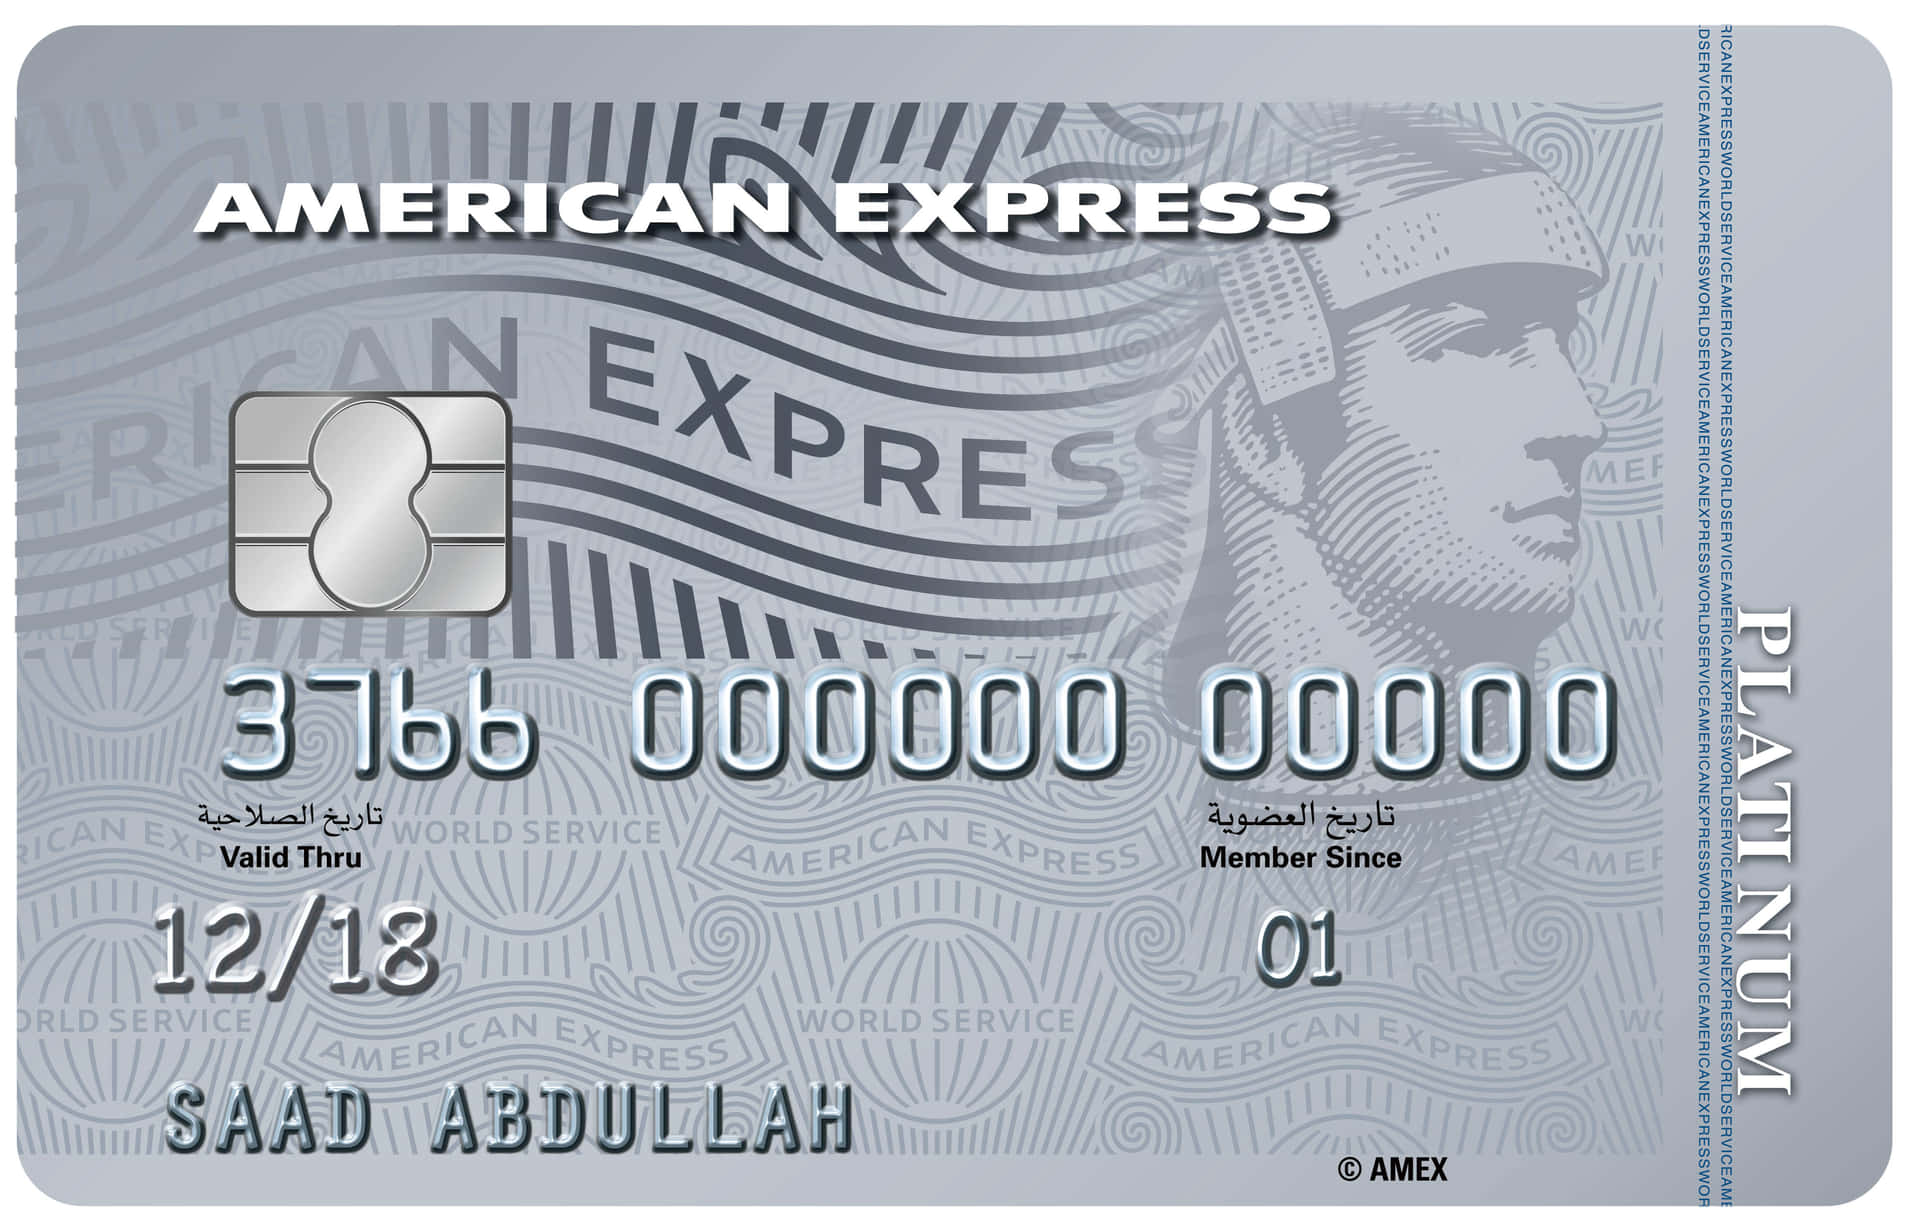 Reach Your Financial Goals with American Express